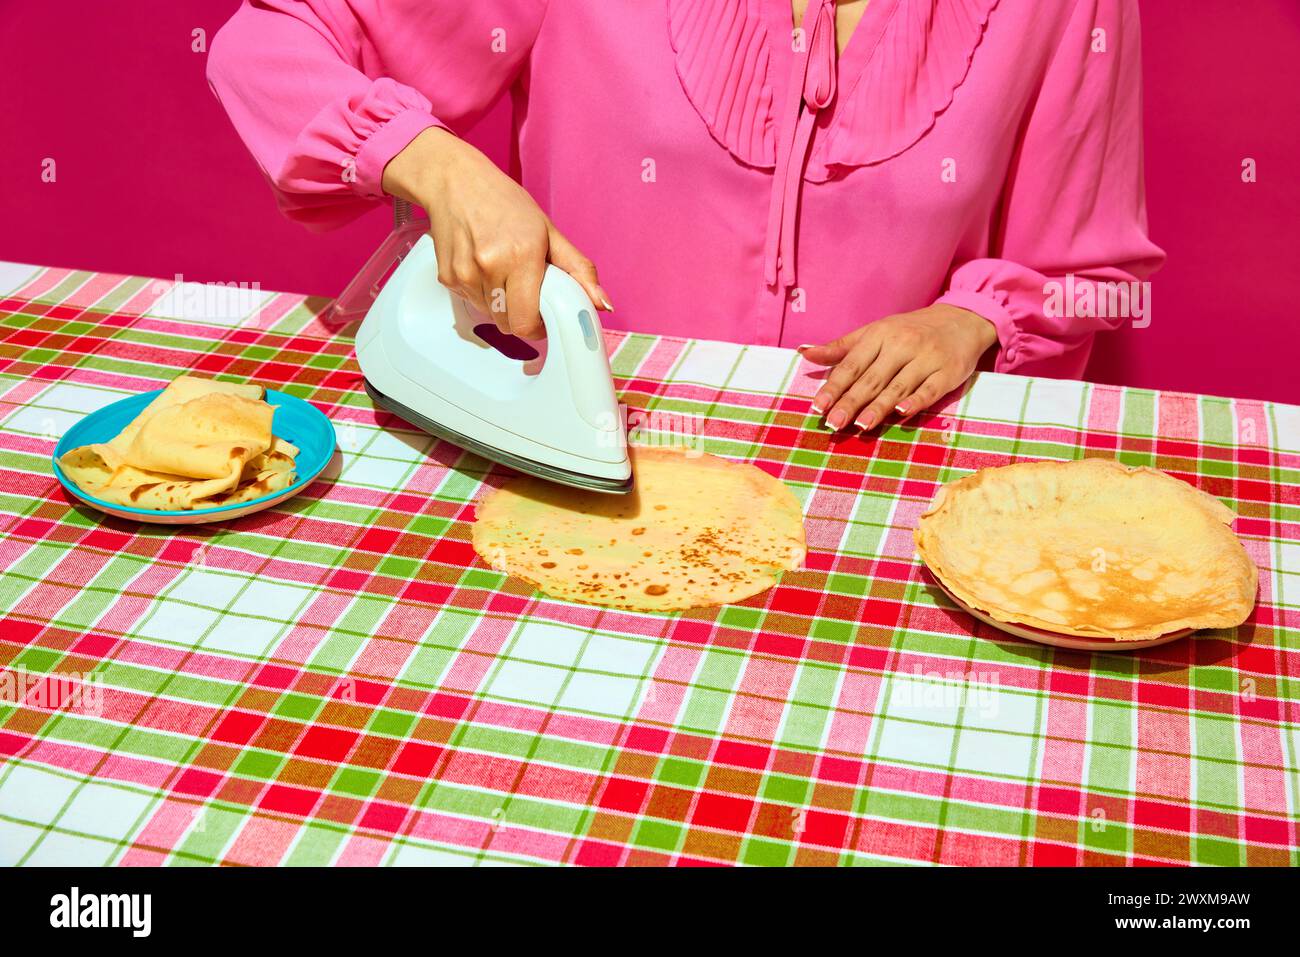 Woman in pink blouse ironing pancake on plaid tablecloth. Meme featuring unexpected ways to prepare food through humor. Stock Photo